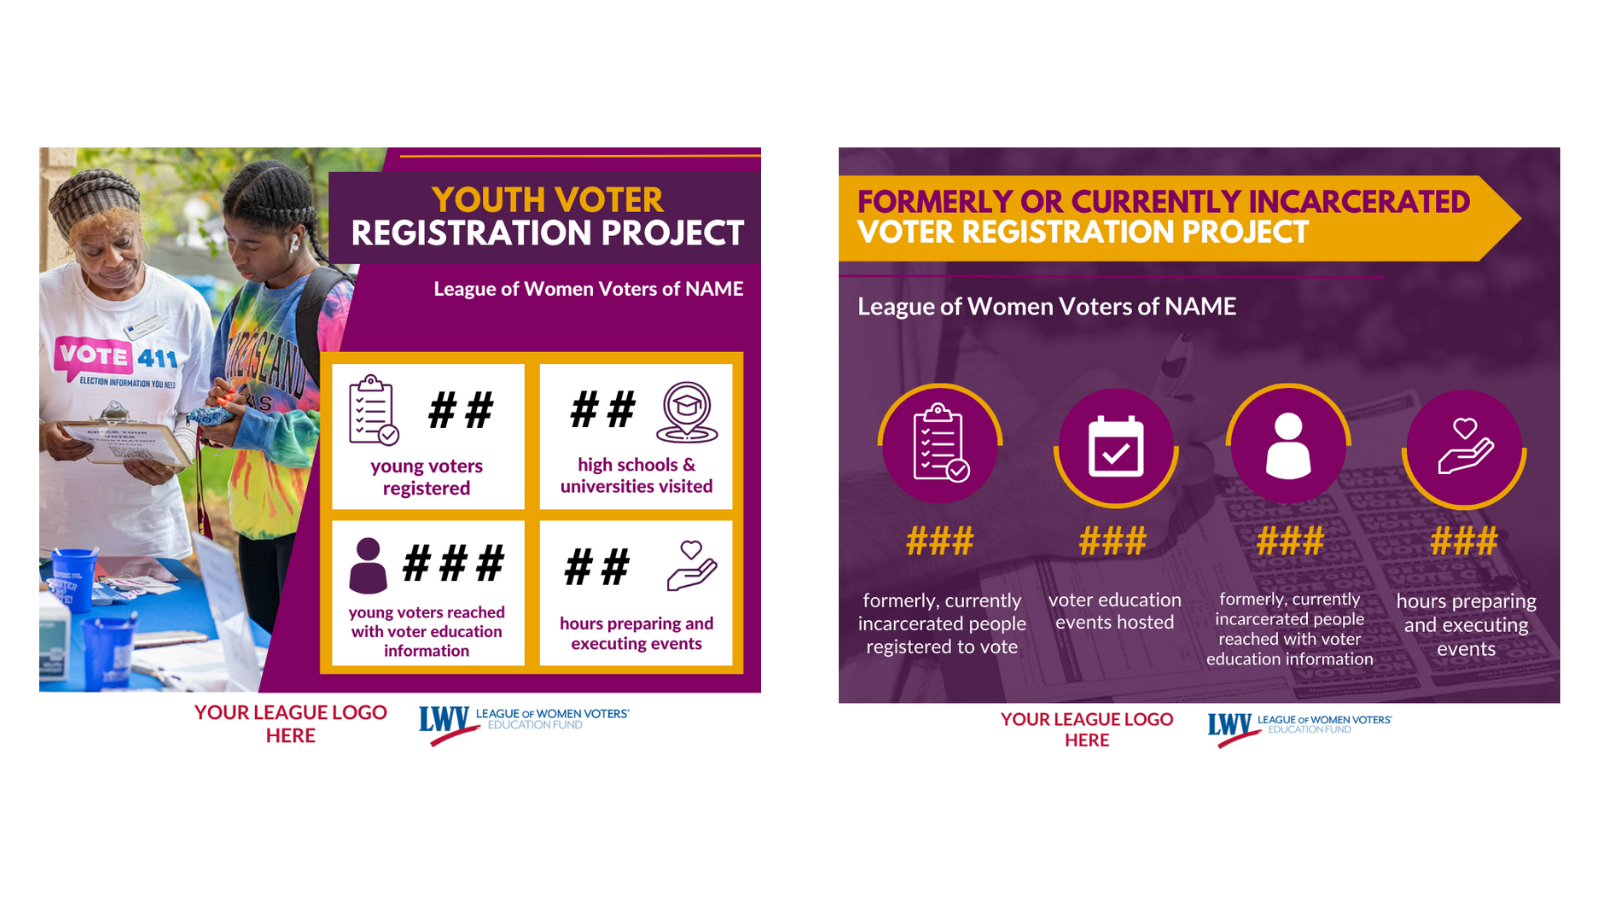 Sample designs of the grantee templates. There are two designs featured - the one of the left has an image of a League member helping a student register to vote, with the title "YOUTH VOTER REGISTRATION PROJECT" in a purple box. There is a yellow box with four white squares. Each square has an icon, with ## symbols. The template on the left in an image with a purple transparency over it. The image is of someone filling out a voter registration form. There is a yellow arrow with the words "FORMERLY OR CURRENTLY INCARCERATED VOTER REGISTRATION PROJECT" at the top. In the middle of this template, there are four purple circles with a yellow border, and white icons in the middle.